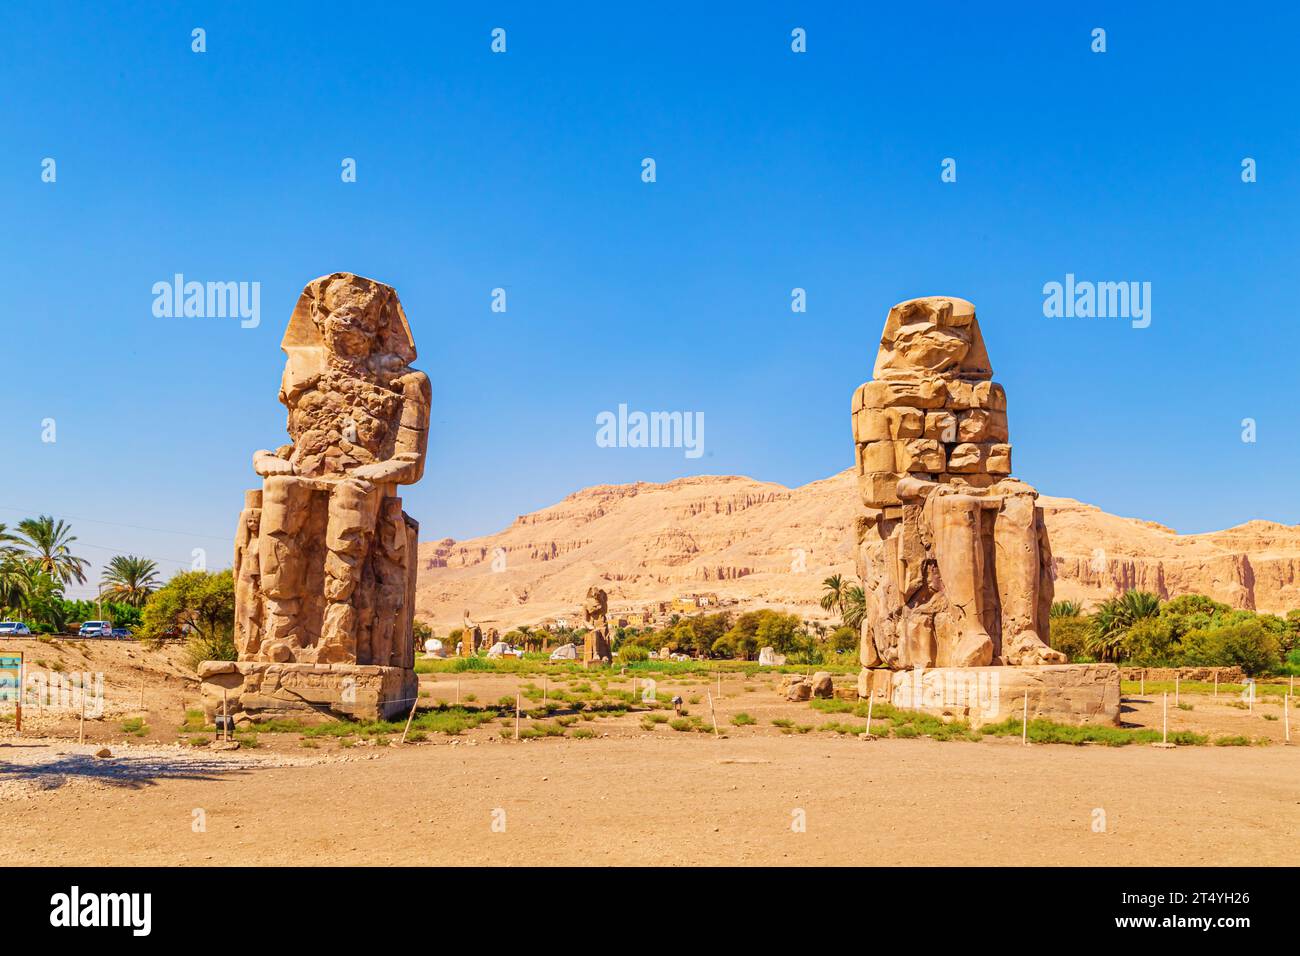 Famous  Colossi of Memnon - massive ruined statues of the Pharaoh Amenhotep III. Travel and tourist landmarks. Luxor, Egypt - October 21, 2023. Stock Photo